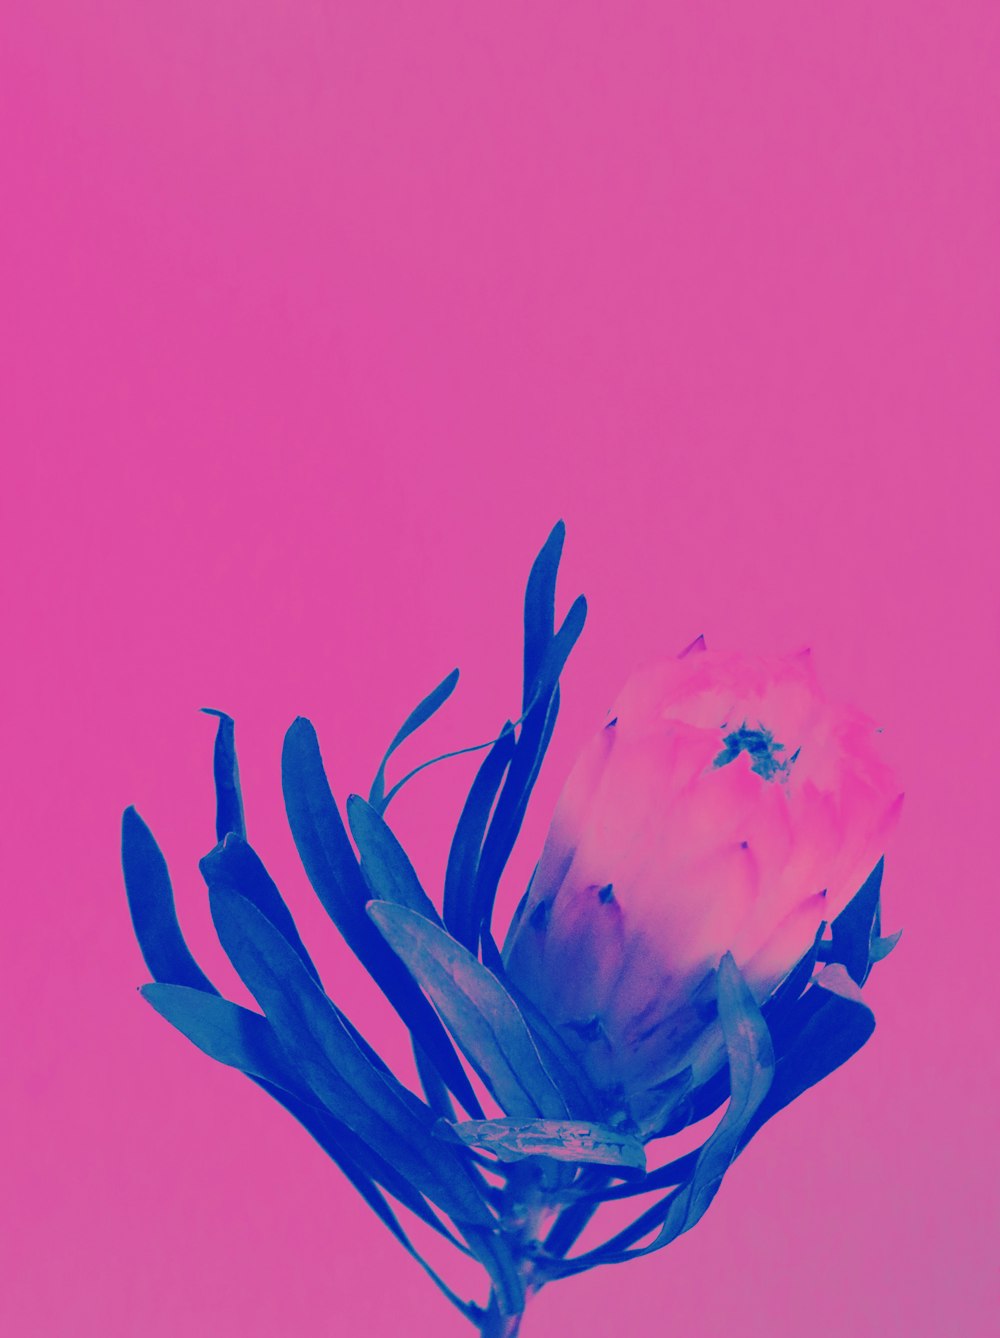 a pink and blue flower against a pink background